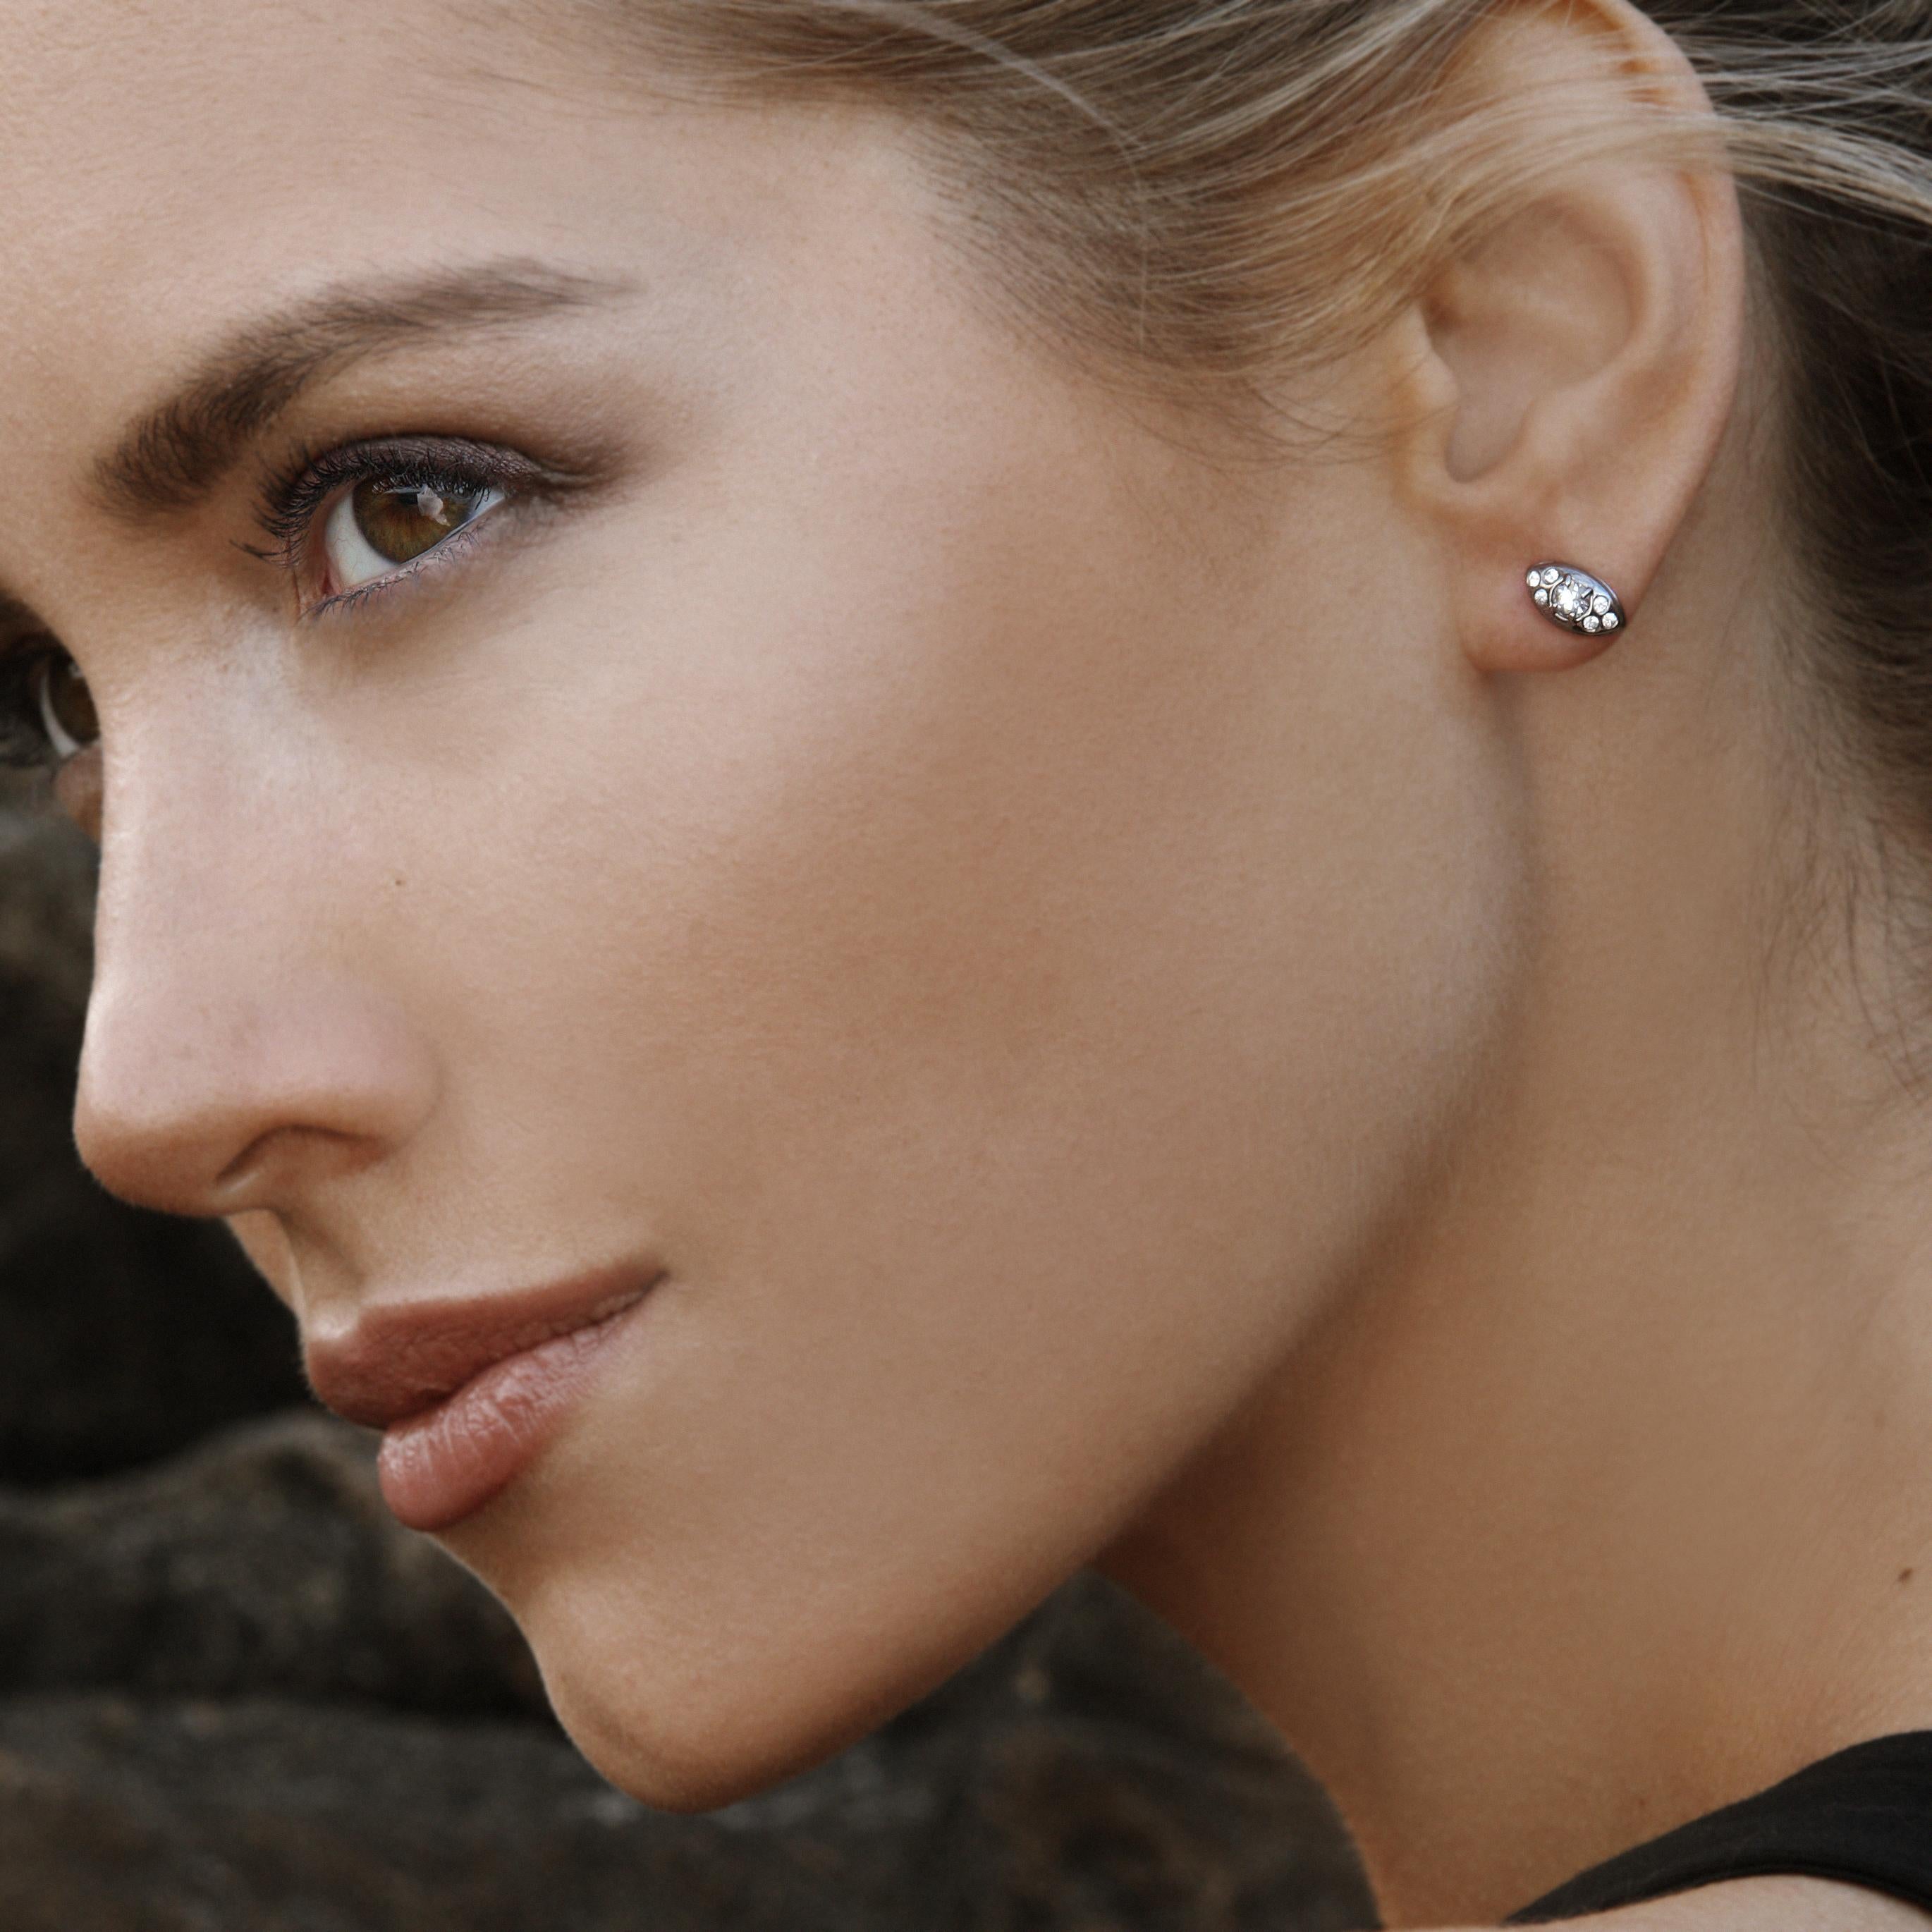 In blackened sterling silver with white sapphires, this sparkly understated earring has an elegant presence. The Singing Pillow stud earring is great on the second and third ear holes as it is intentionally sculpted to curve around the